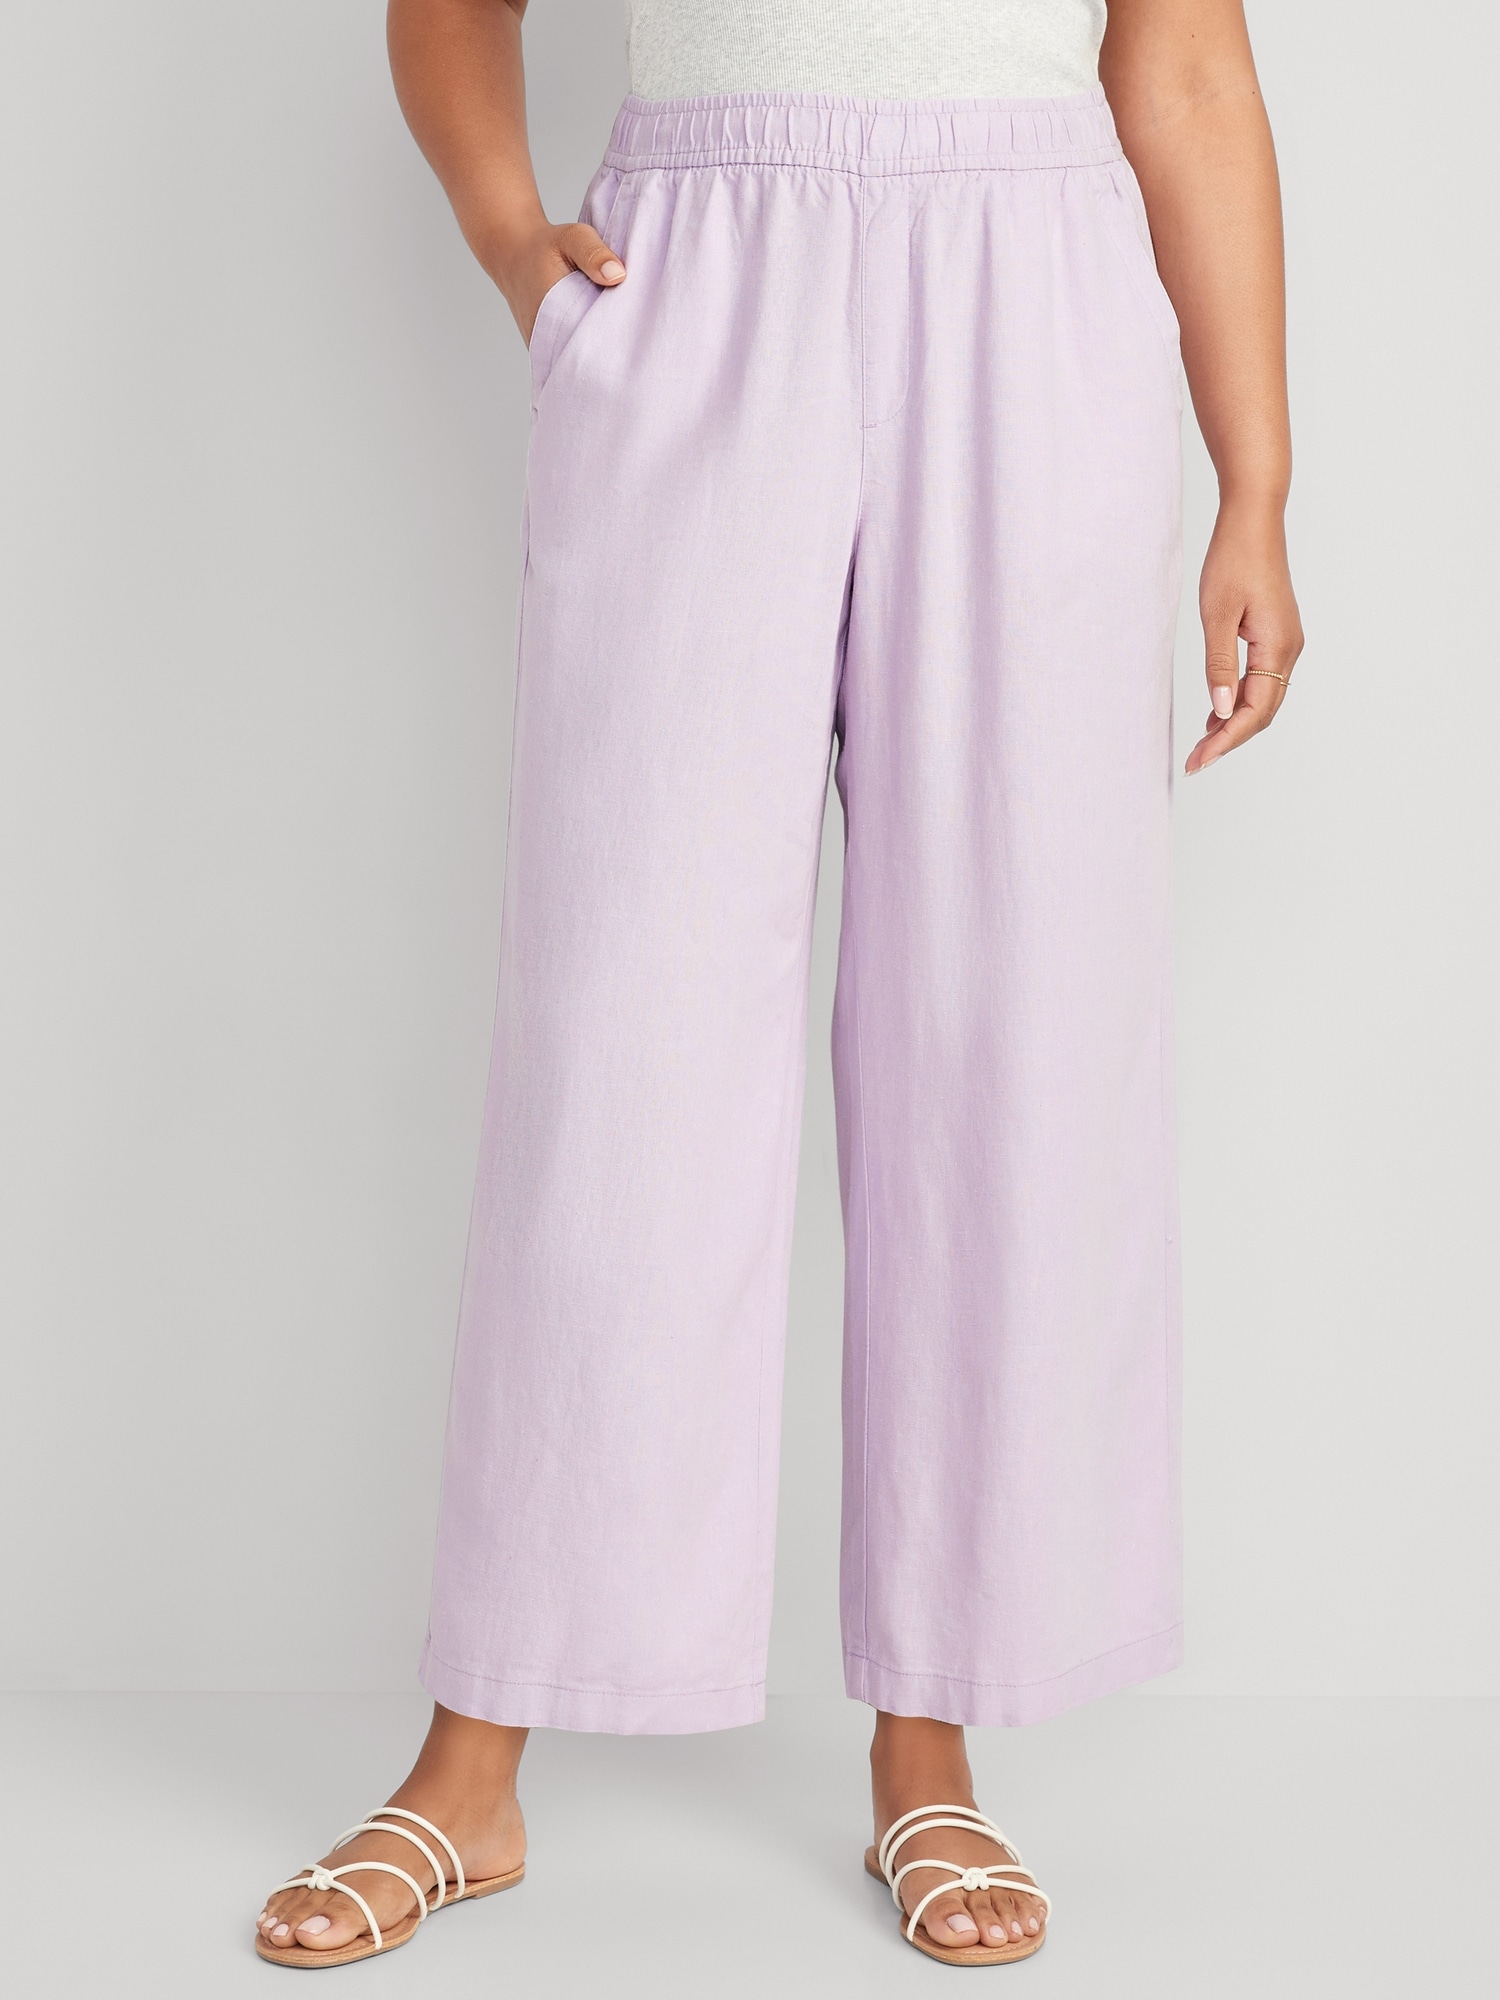 High-Waisted Linen-Blend Plus-Size Culotte Pants, Old Navy